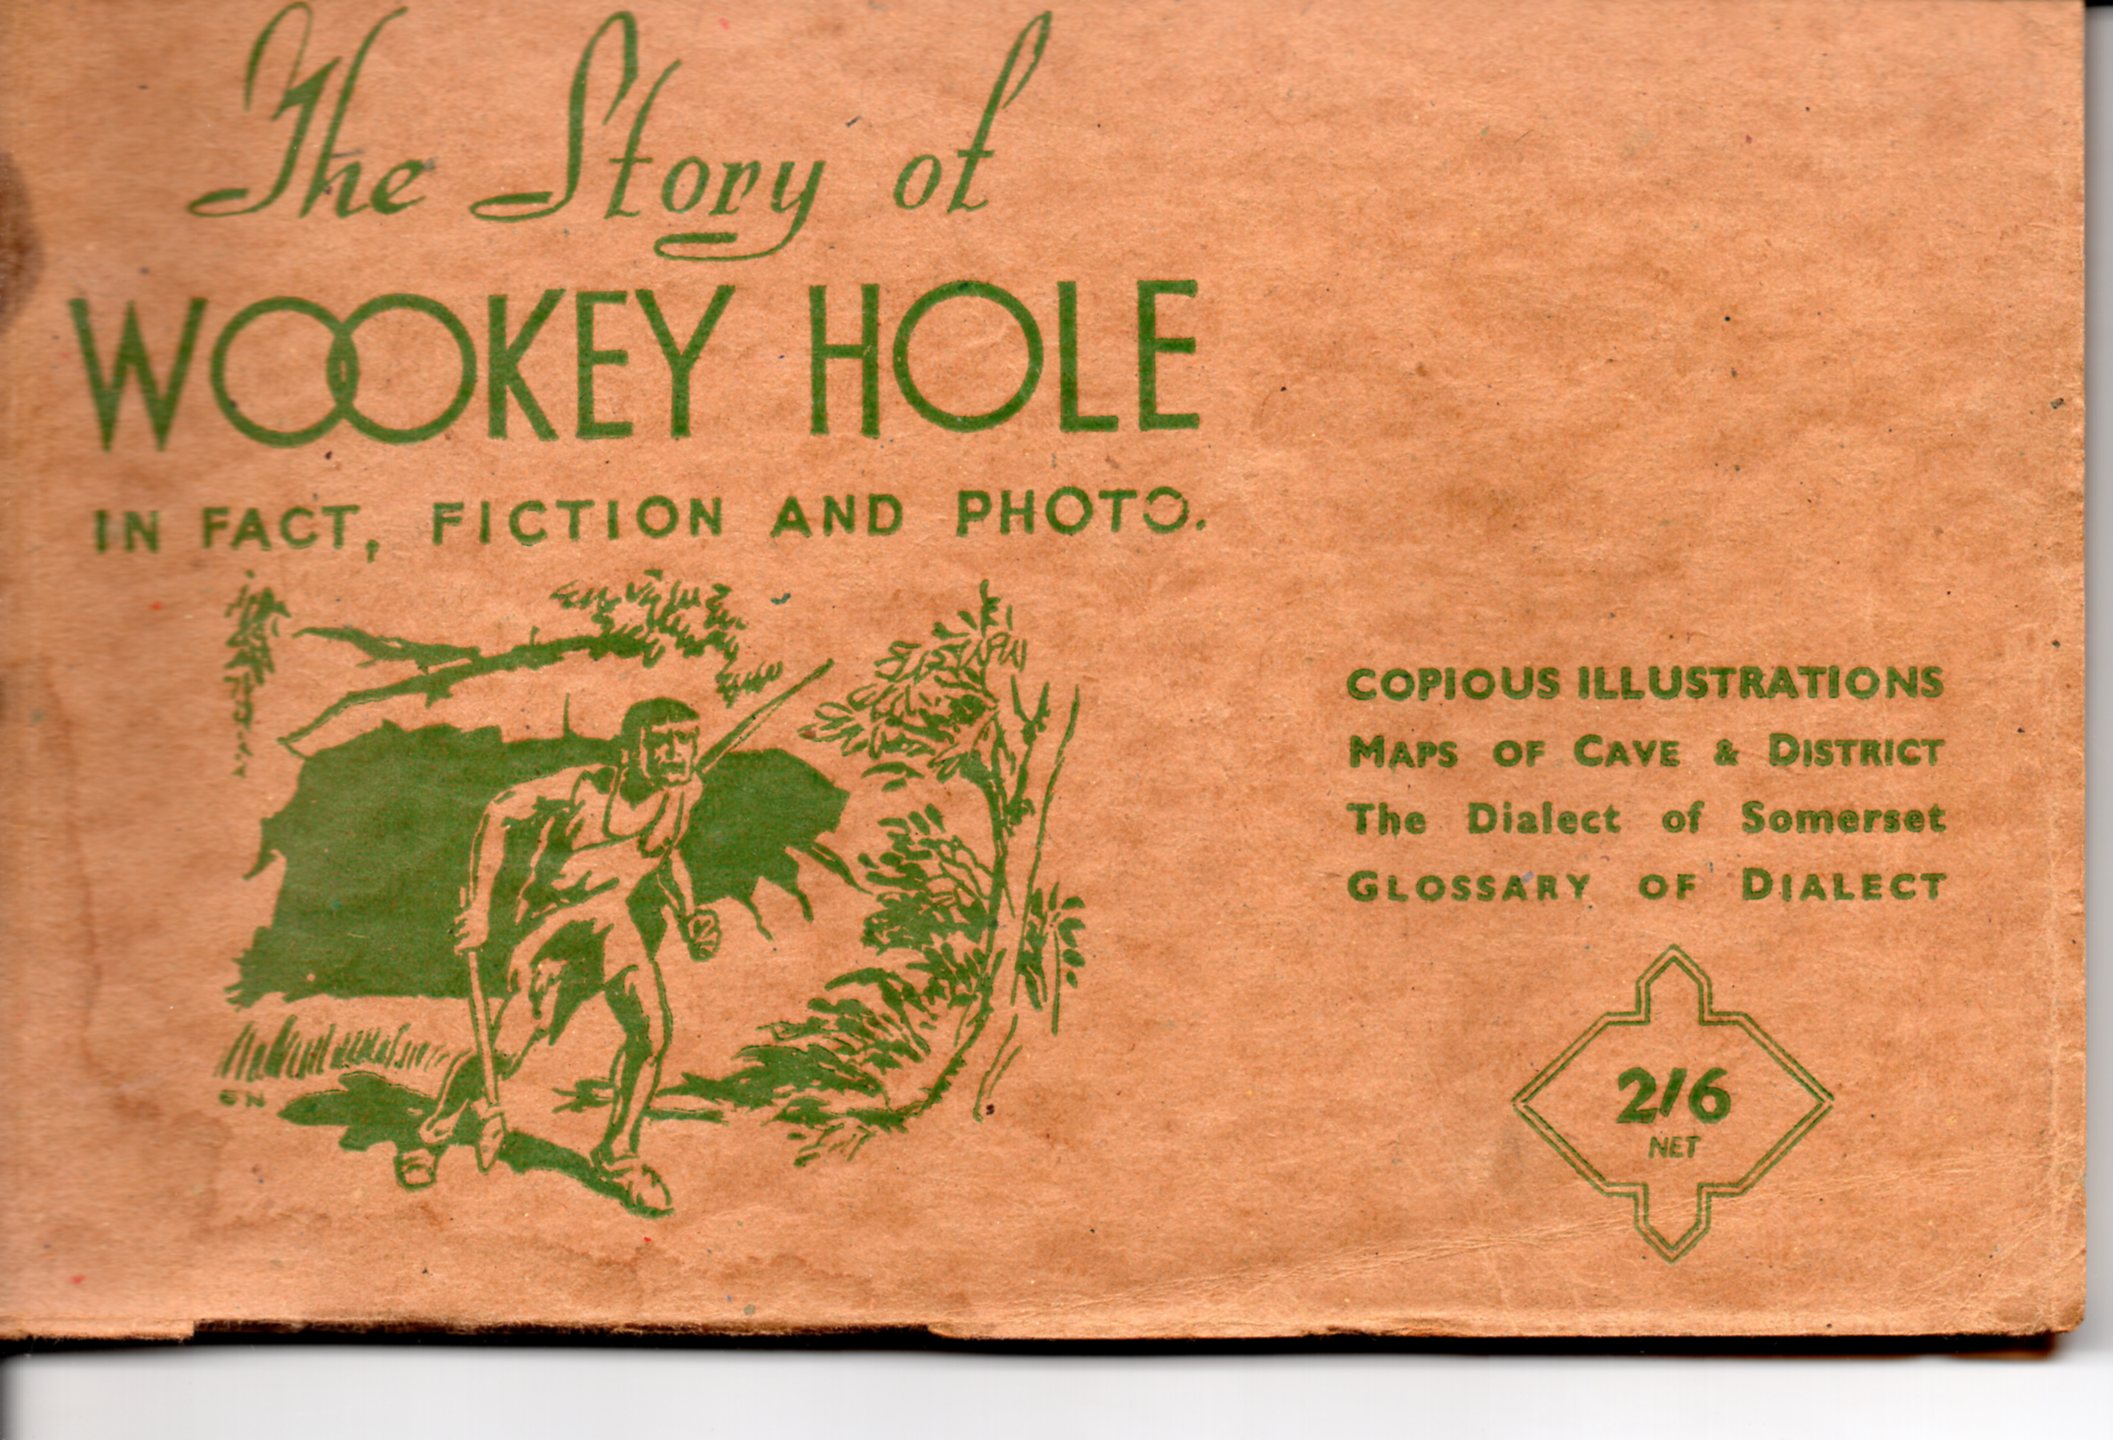 [USED] The Story of Wookey Hole in Fact, Fiction and Photo  , Copious illustrations plan of both caves District Road Map 